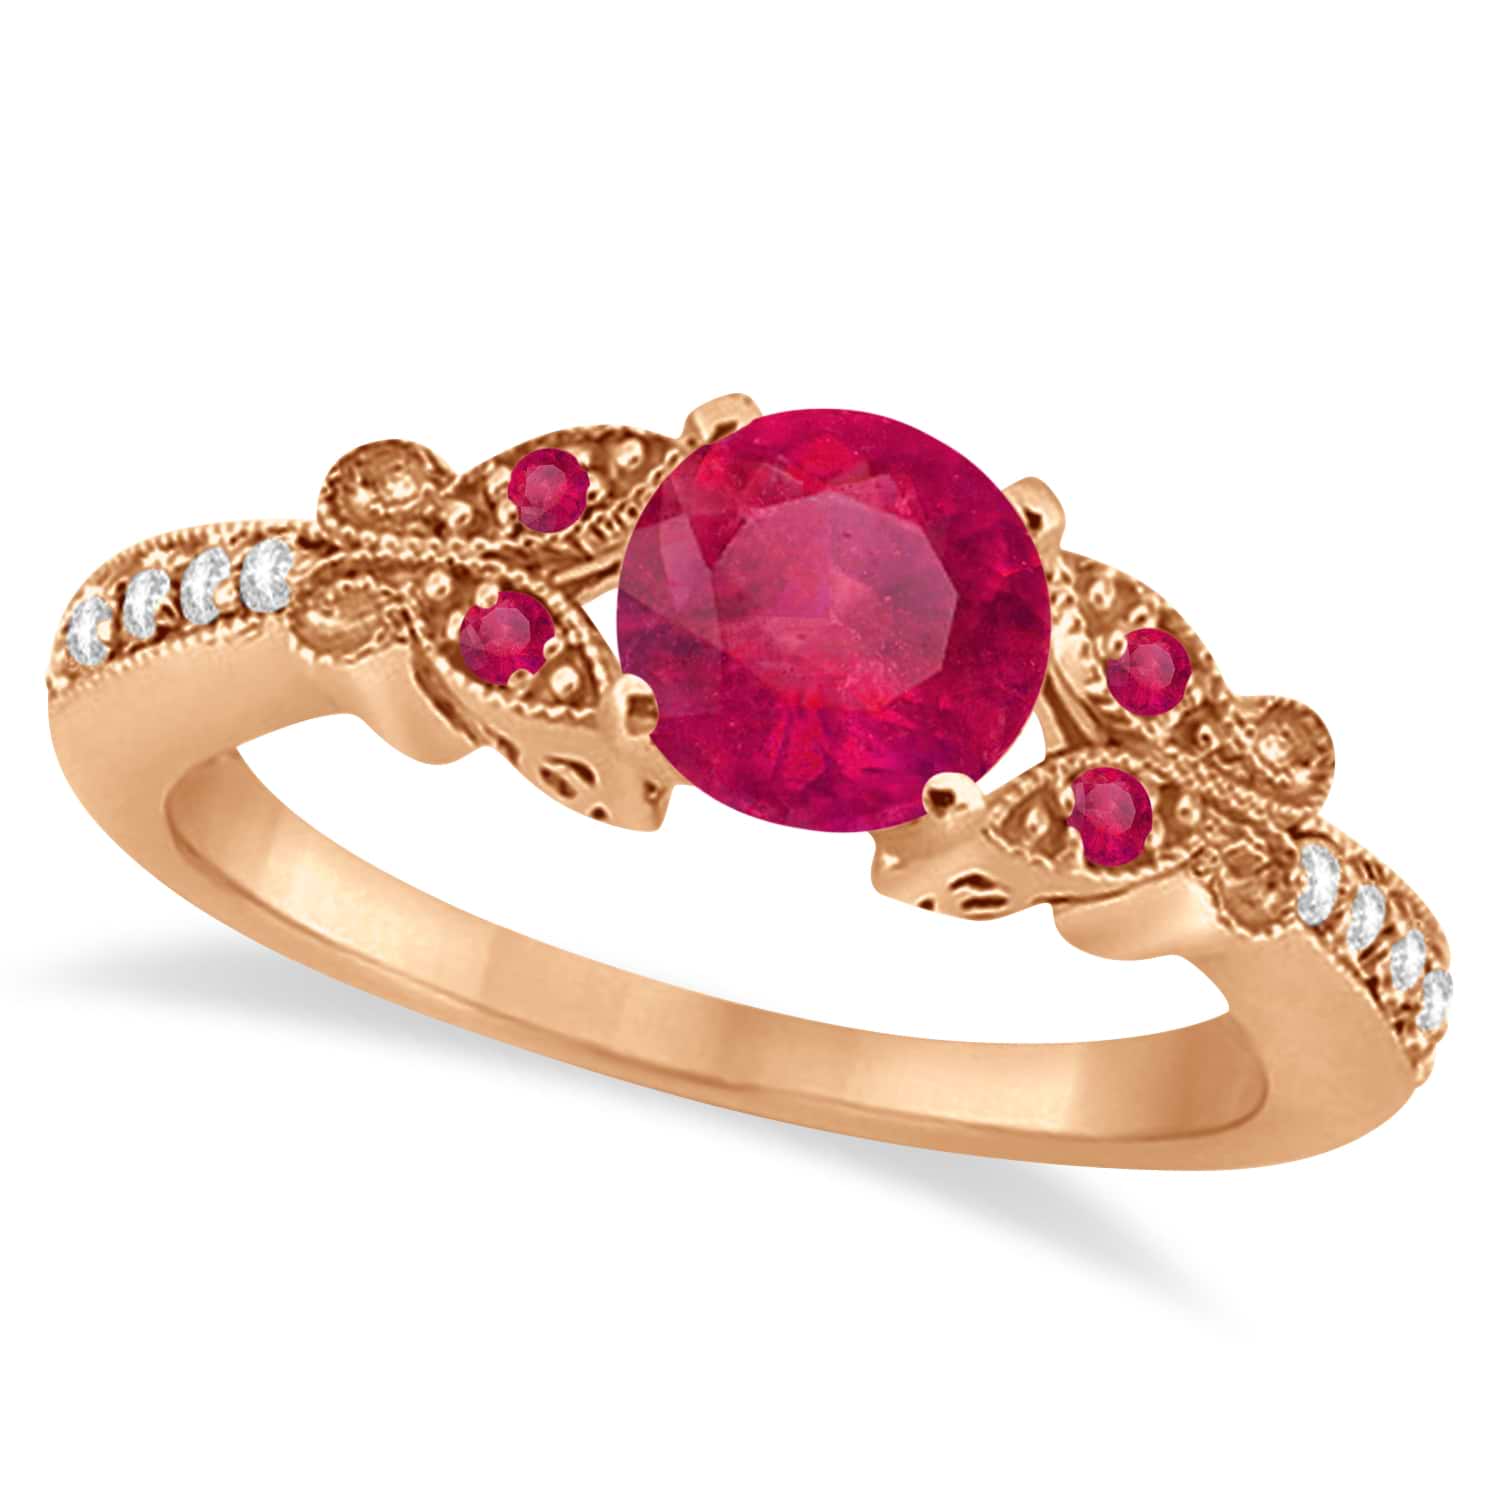 Butterfly Genuine Ruby & Diamond Engagement Ring 18K Rose Gold (1.81ct)